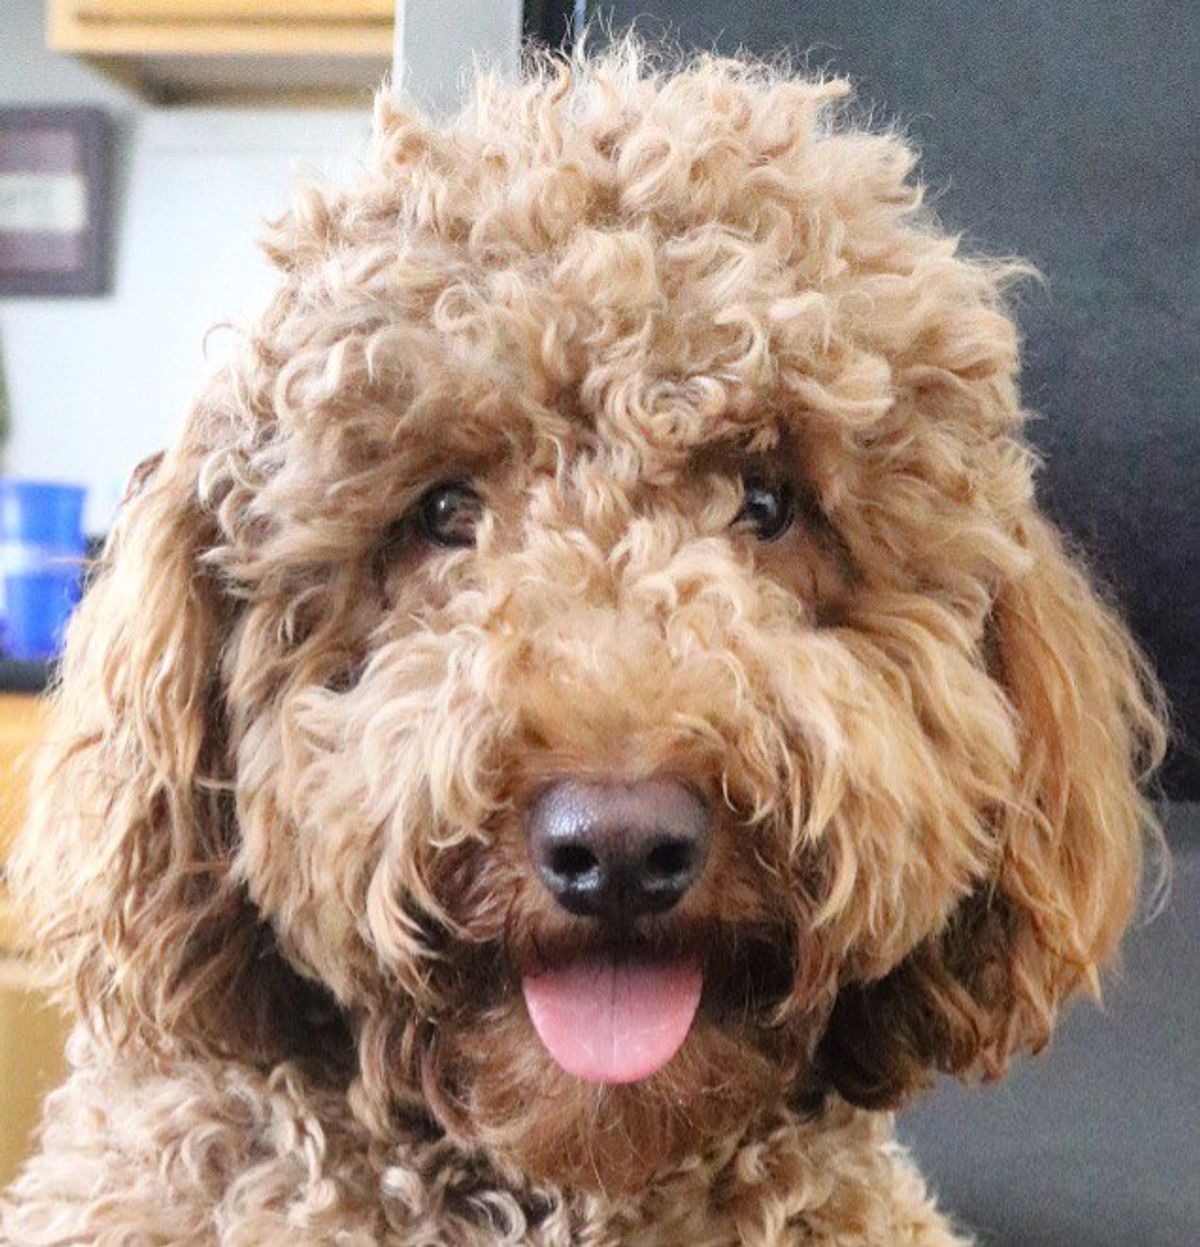 Watch A Goldendoodle Get A Haircut At A New York Salon